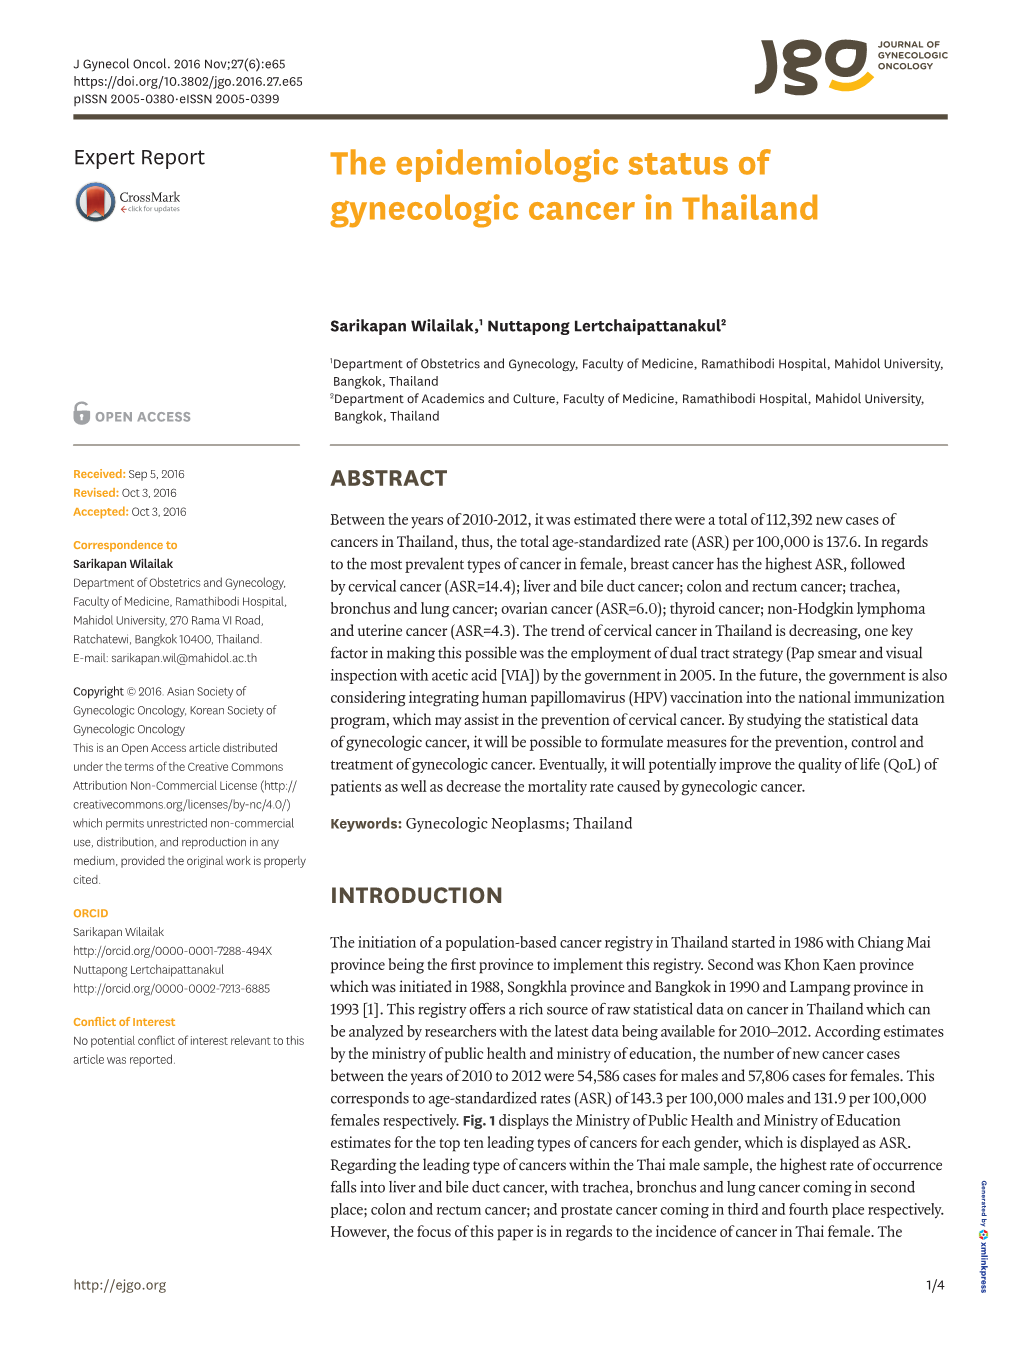 The Epidemiologic Status of Gynecologic Cancer in Thailand